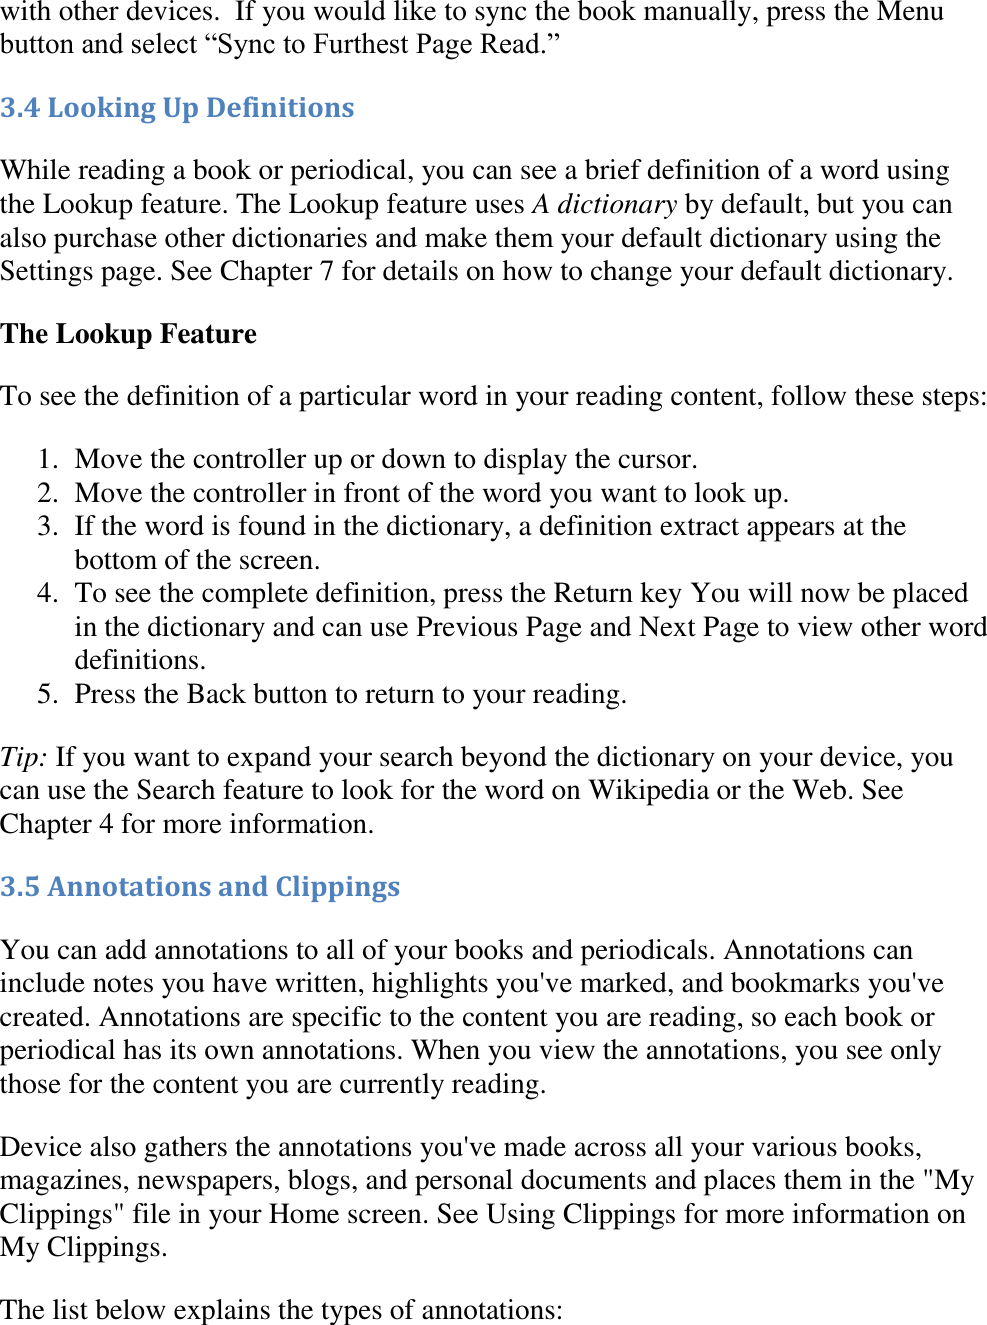   with other devices.  If you would like to sync the book manually, press the Menu button and select “Sync to Furthest Page Read.” 3.4 Looking Up Definitions While reading a book or periodical, you can see a brief definition of a word using the Lookup feature. The Lookup feature uses A dictionary by default, but you can also purchase other dictionaries and make them your default dictionary using the Settings page. See Chapter 7 for details on how to change your default dictionary. The Lookup Feature To see the definition of a particular word in your reading content, follow these steps: 1. Move the controller up or down to display the cursor.  2. Move the controller in front of the word you want to look up.  3. If the word is found in the dictionary, a definition extract appears at the bottom of the screen.  4. To see the complete definition, press the Return key You will now be placed in the dictionary and can use Previous Page and Next Page to view other word definitions.  5. Press the Back button to return to your reading.  Tip: If you want to expand your search beyond the dictionary on your device, you can use the Search feature to look for the word on Wikipedia or the Web. See Chapter 4 for more information. 3.5 Annotations and Clippings You can add annotations to all of your books and periodicals. Annotations can include notes you have written, highlights you&apos;ve marked, and bookmarks you&apos;ve created. Annotations are specific to the content you are reading, so each book or periodical has its own annotations. When you view the annotations, you see only those for the content you are currently reading. Device also gathers the annotations you&apos;ve made across all your various books, magazines, newspapers, blogs, and personal documents and places them in the &quot;My Clippings&quot; file in your Home screen. See Using Clippings for more information on My Clippings. The list below explains the types of annotations: 